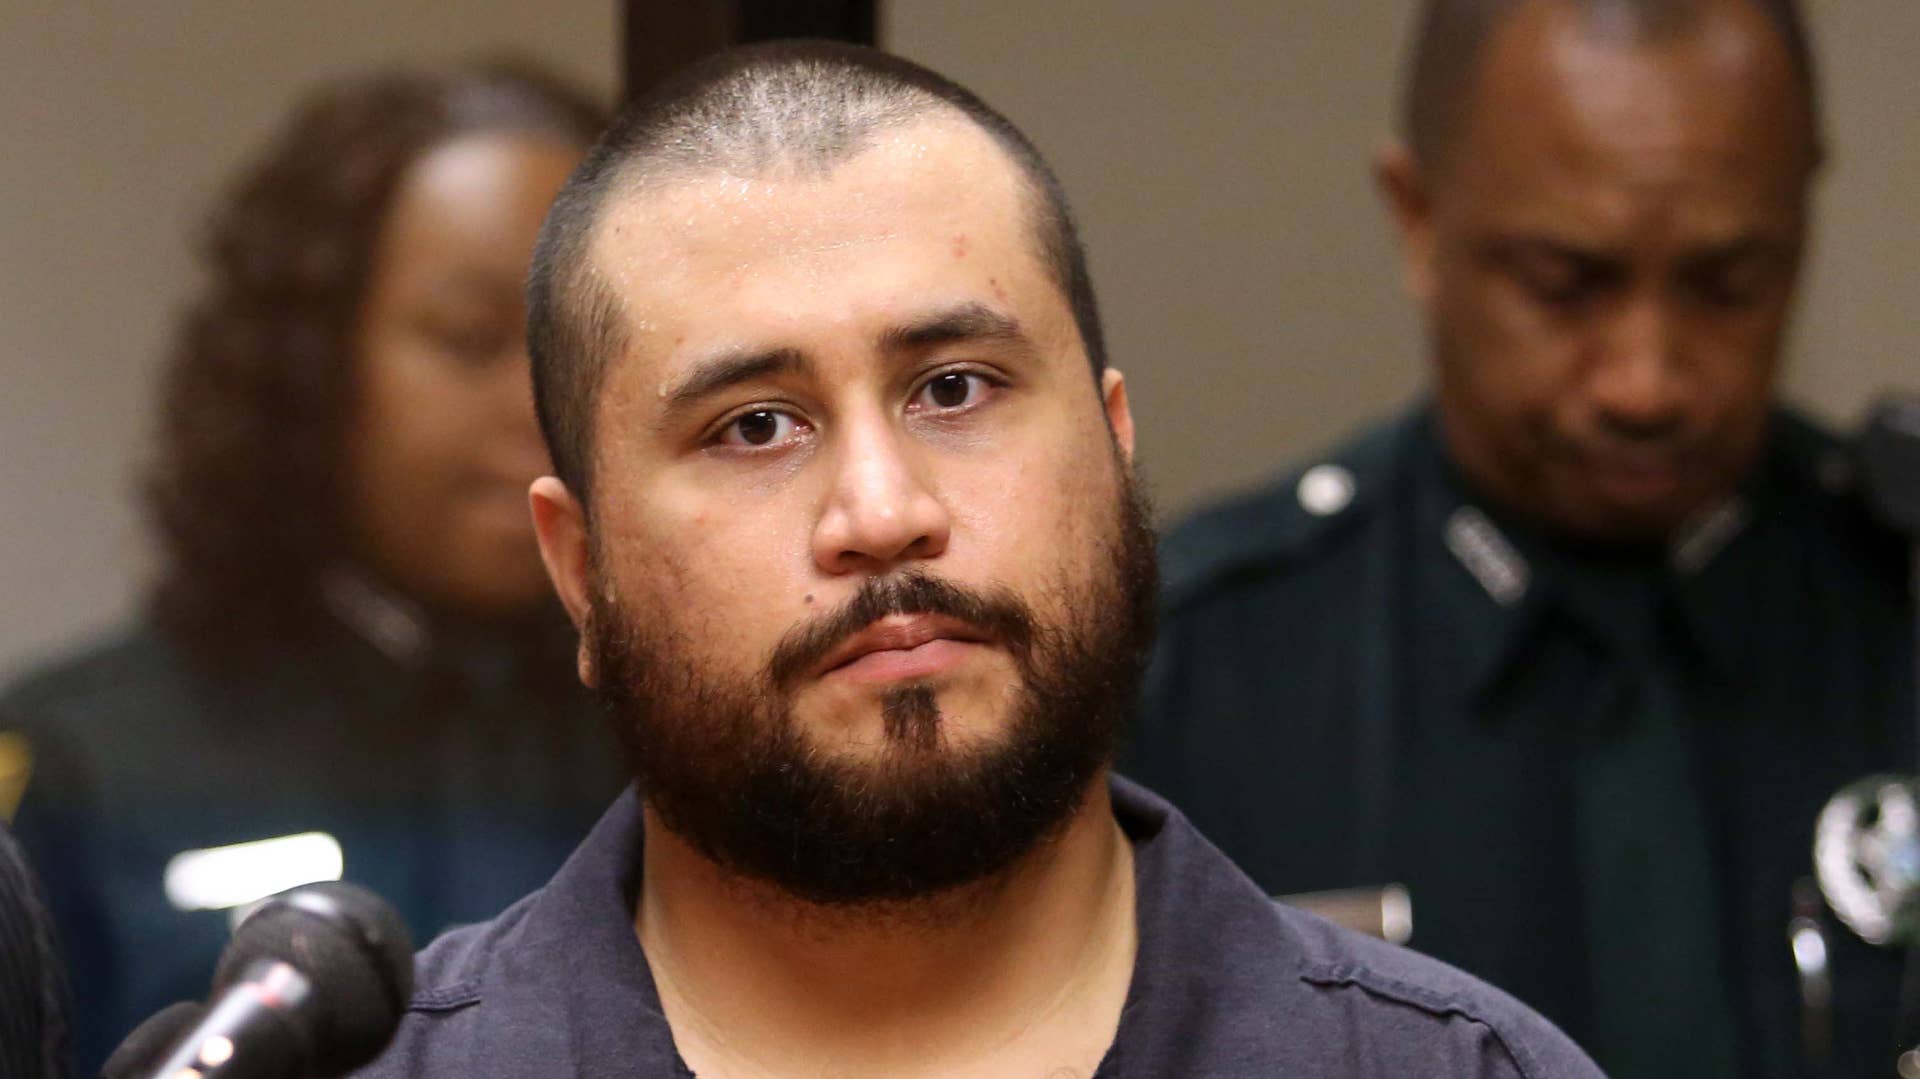 George Zimmerman listens to defense counsel during court appearance.